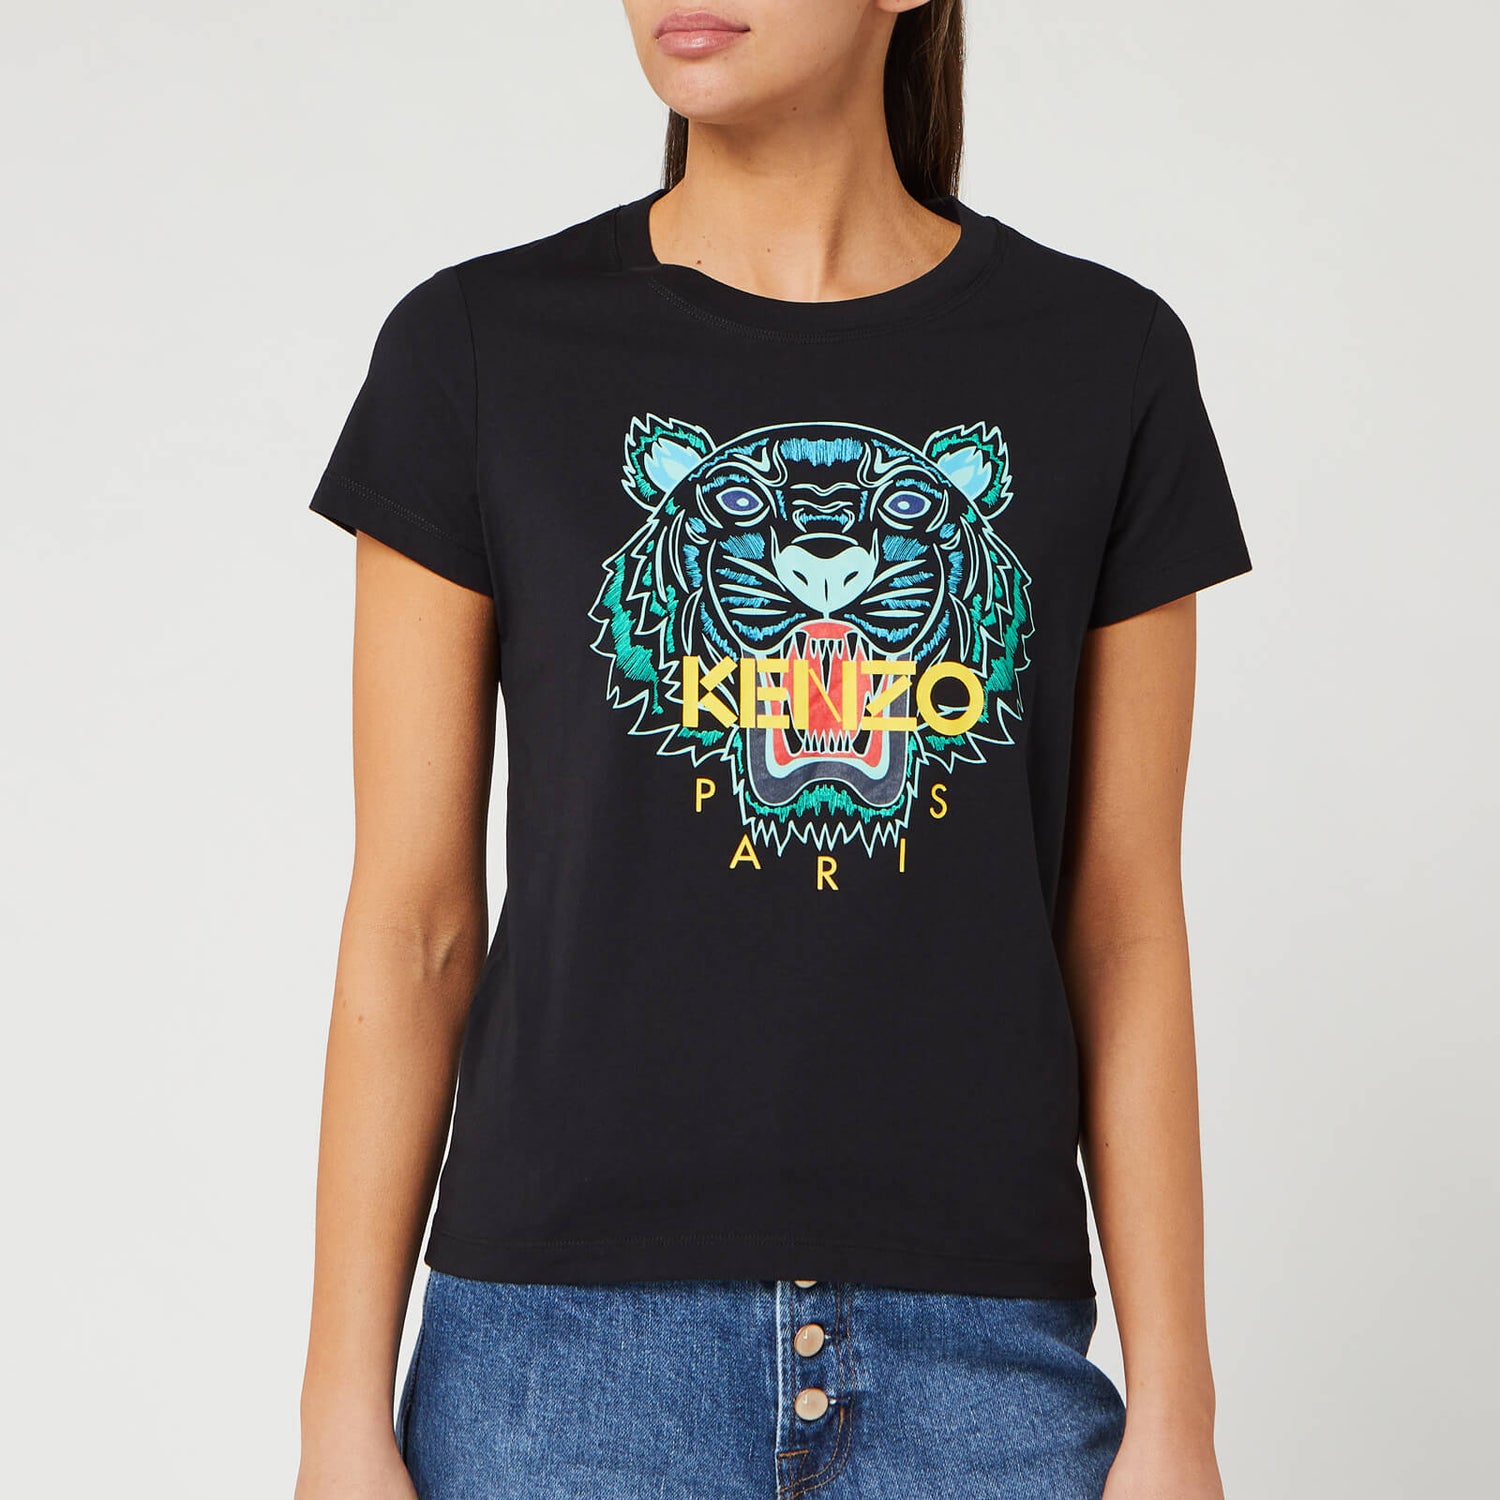 KENZO Women's Classic Tiger T-Shirt - Black - Free UK Delivery Available